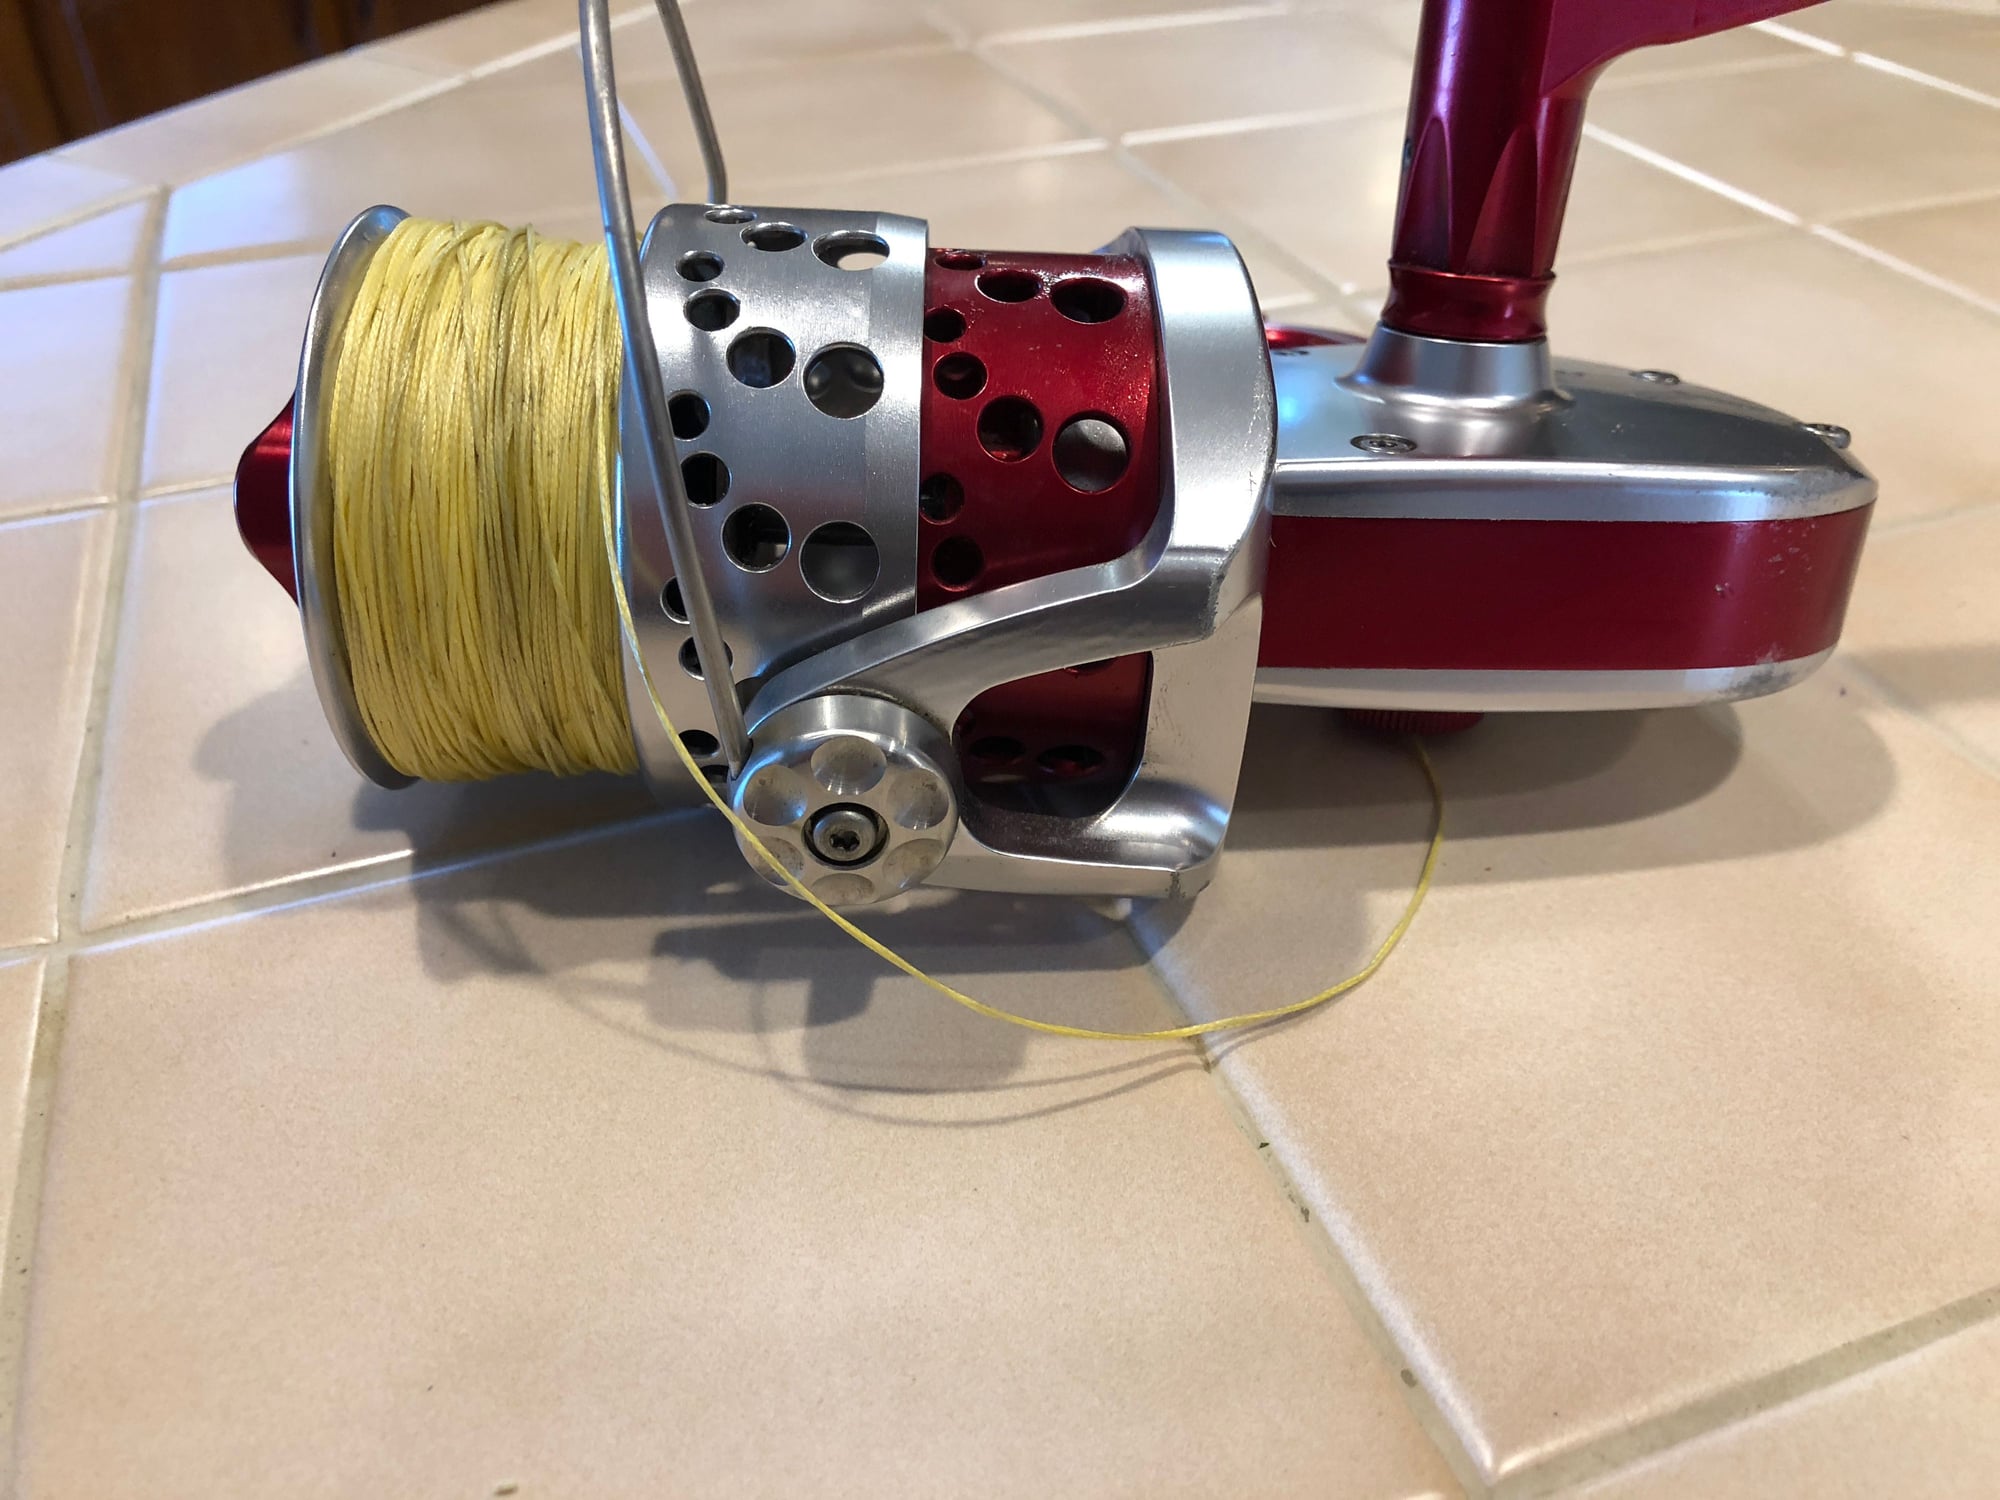 Irt spinning reel - The Hull Truth - Boating and Fishing Forum